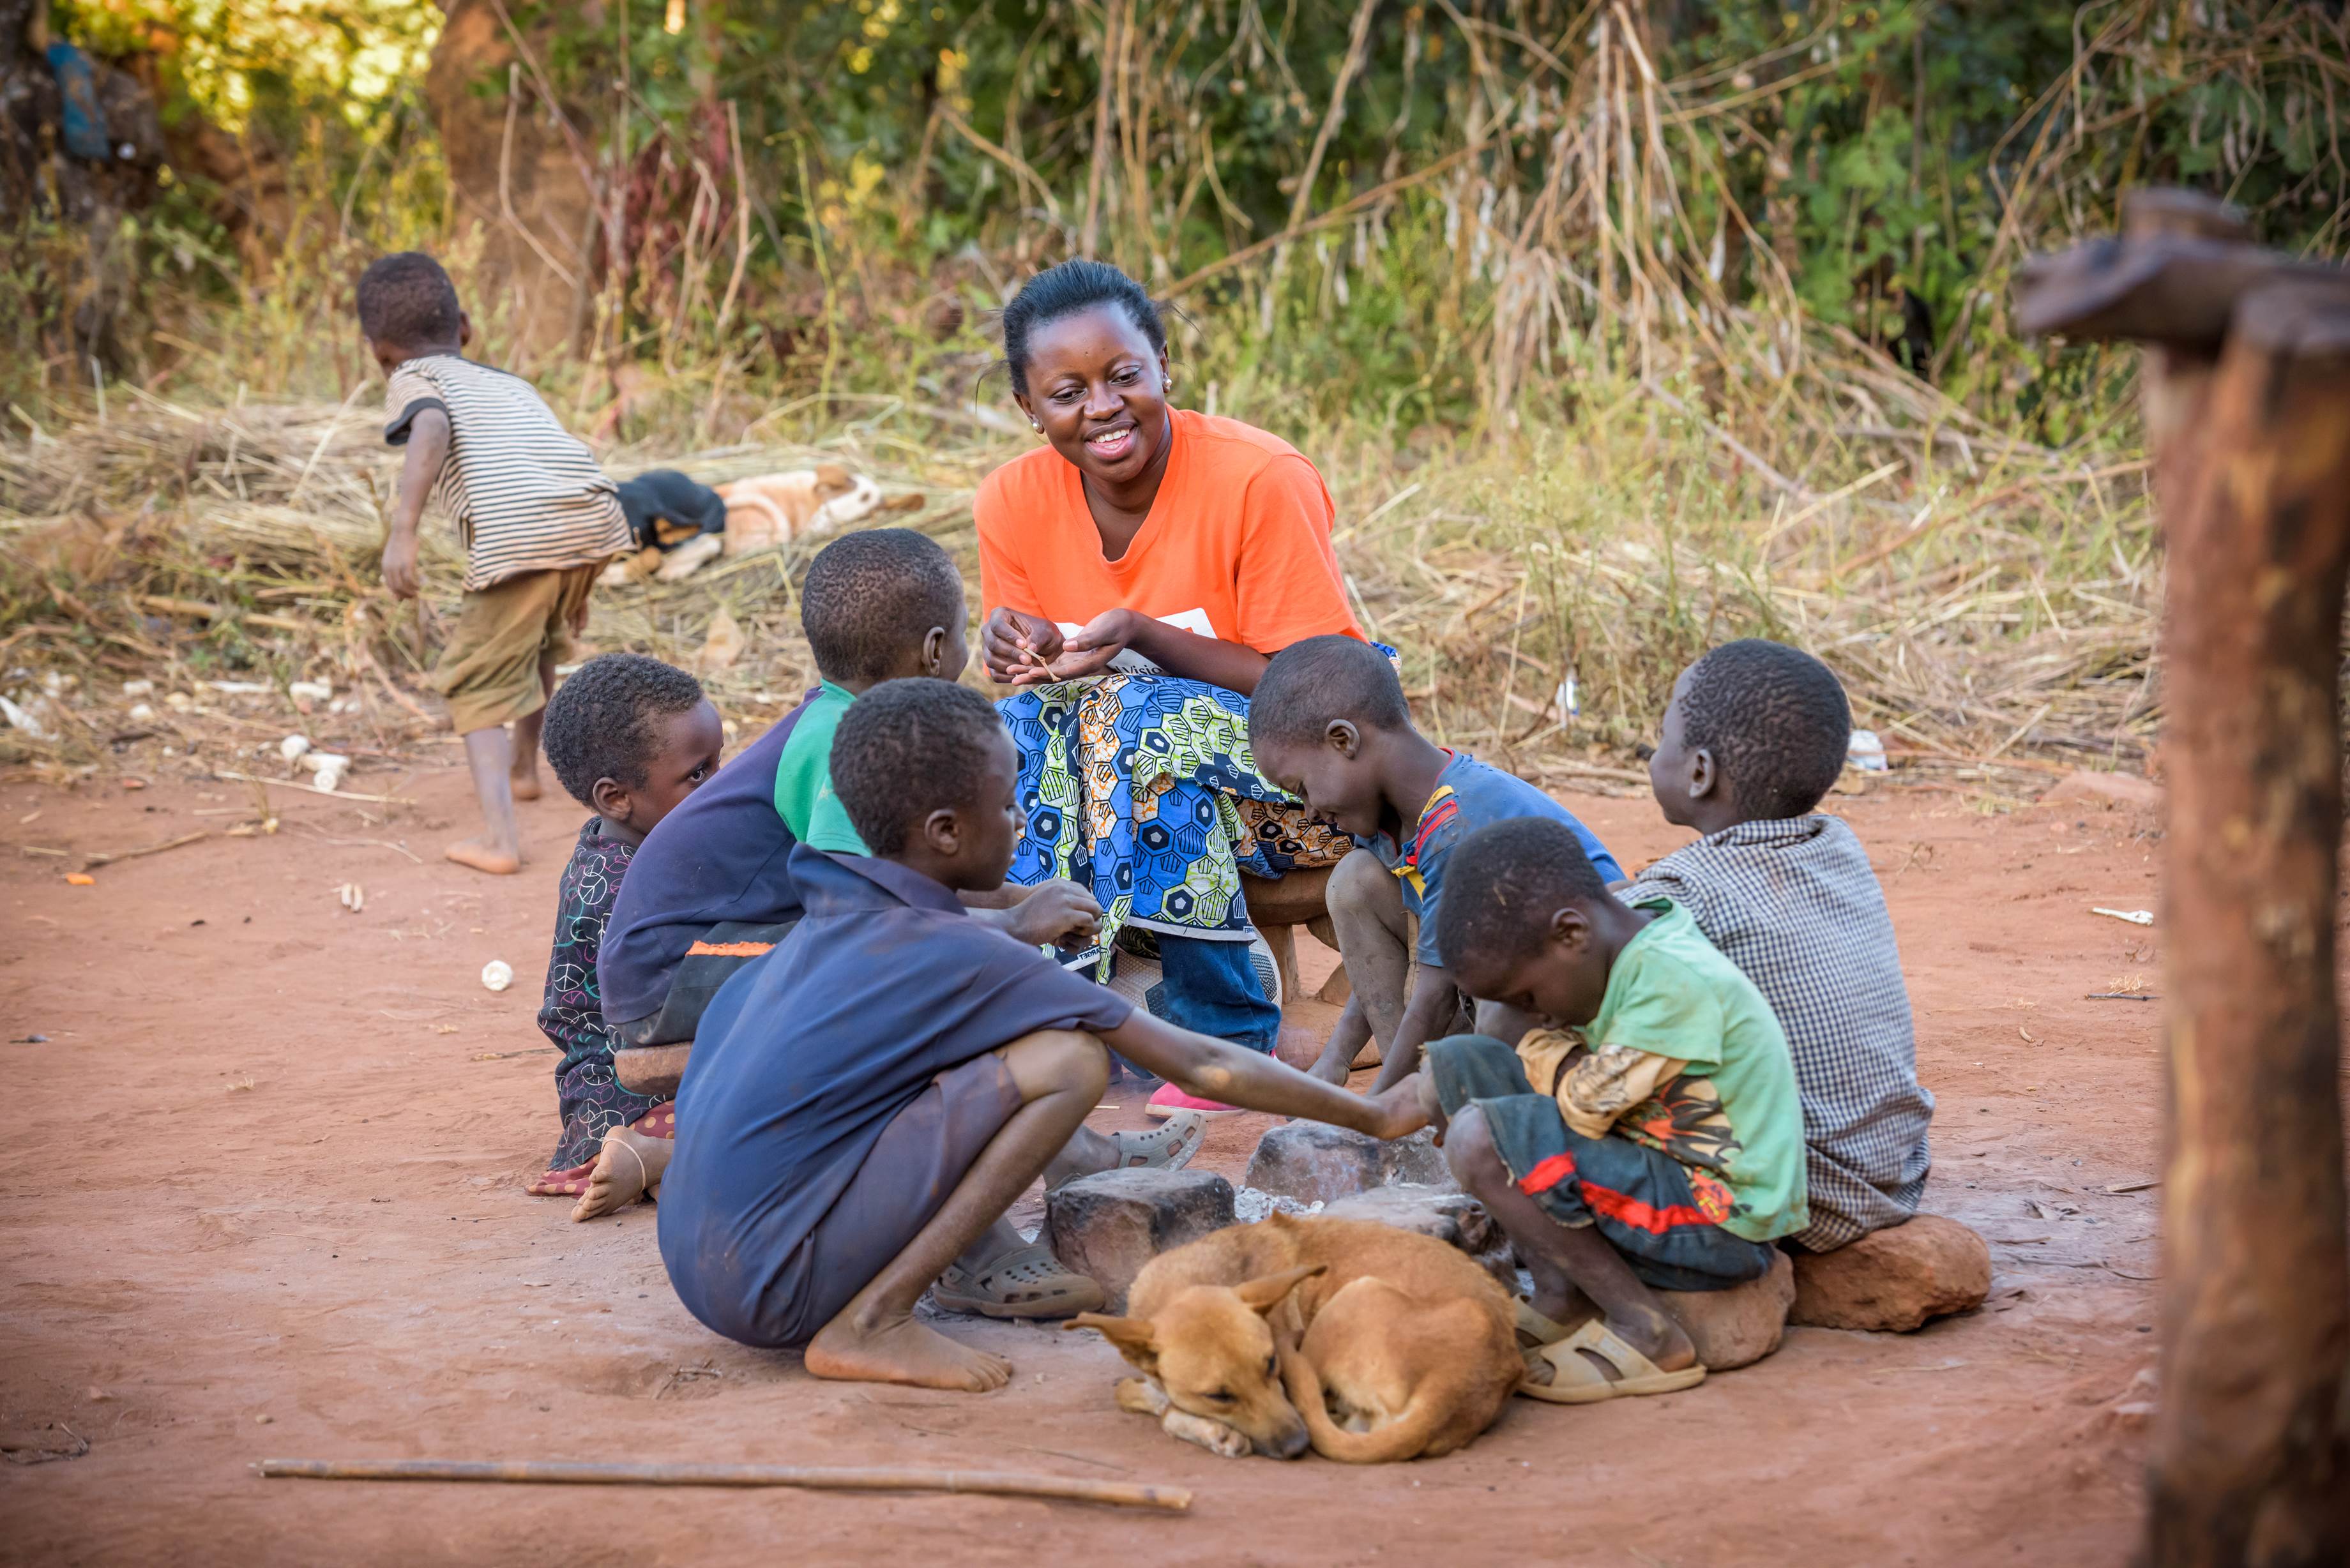 World Vision staff member sat with six children in a village in Zambia